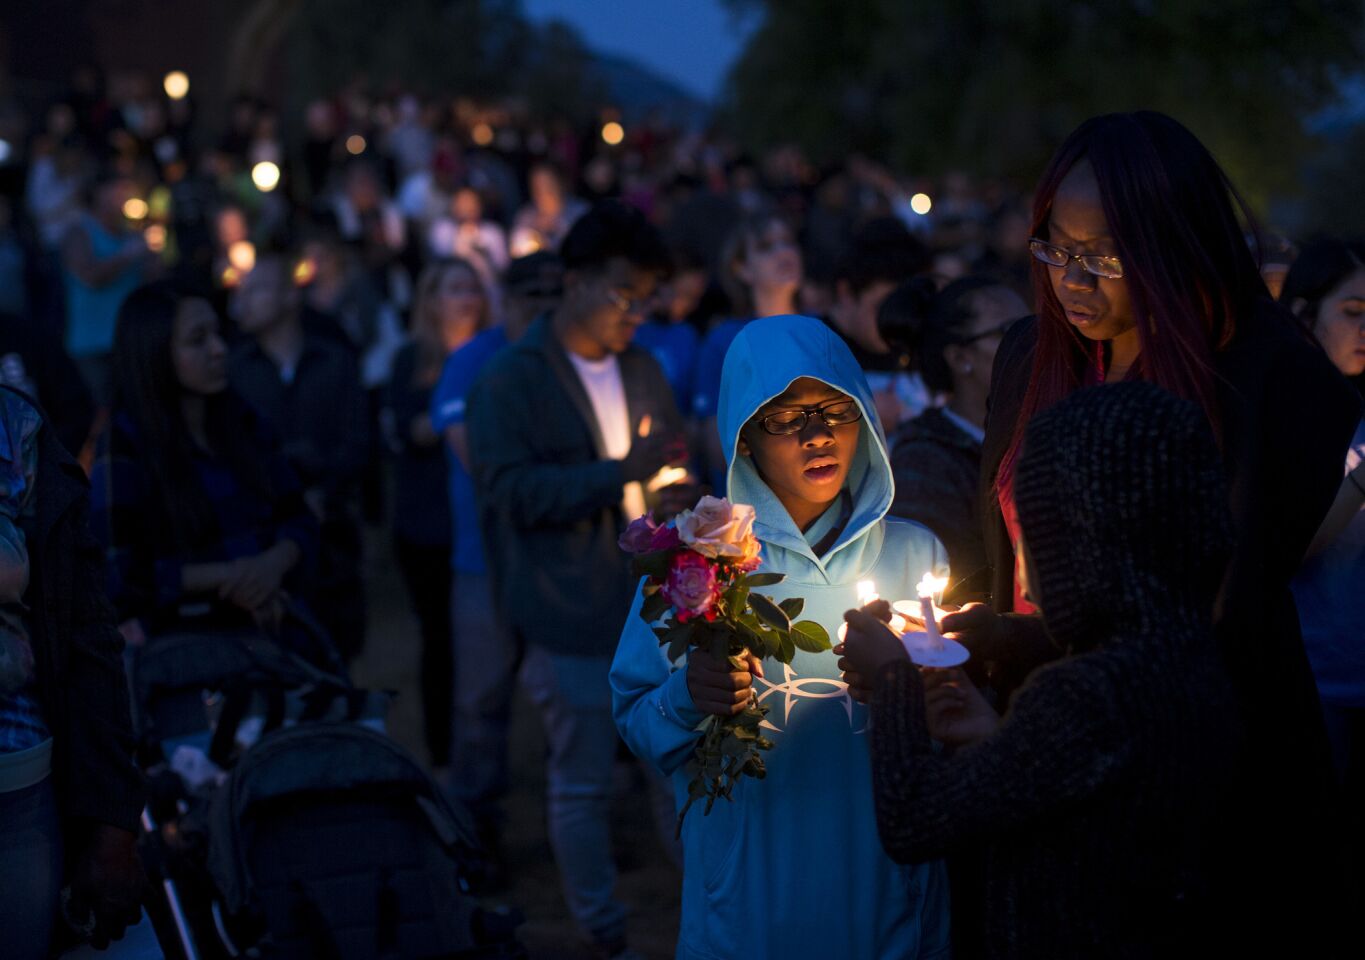 North Park student Elijah Beaven attends a candlelight prayer vigil with his mother, Laura Beaven.